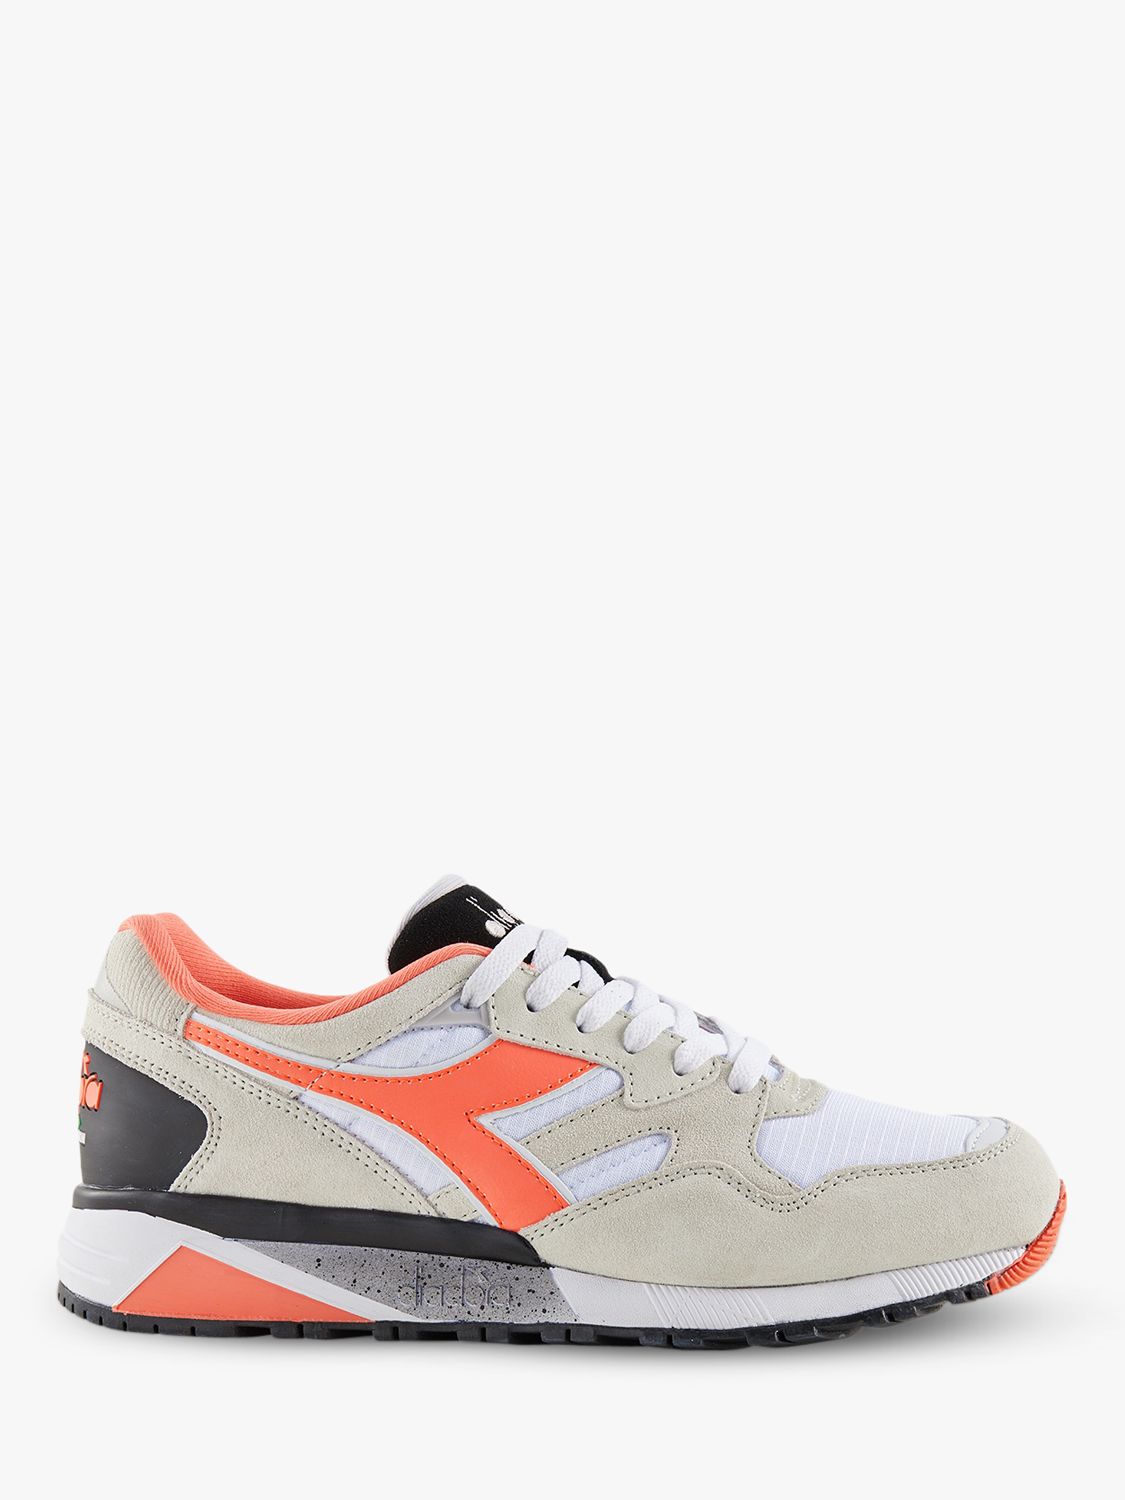 Diadora N9002 Double Action Technology Trainers at John Lewis & Partners